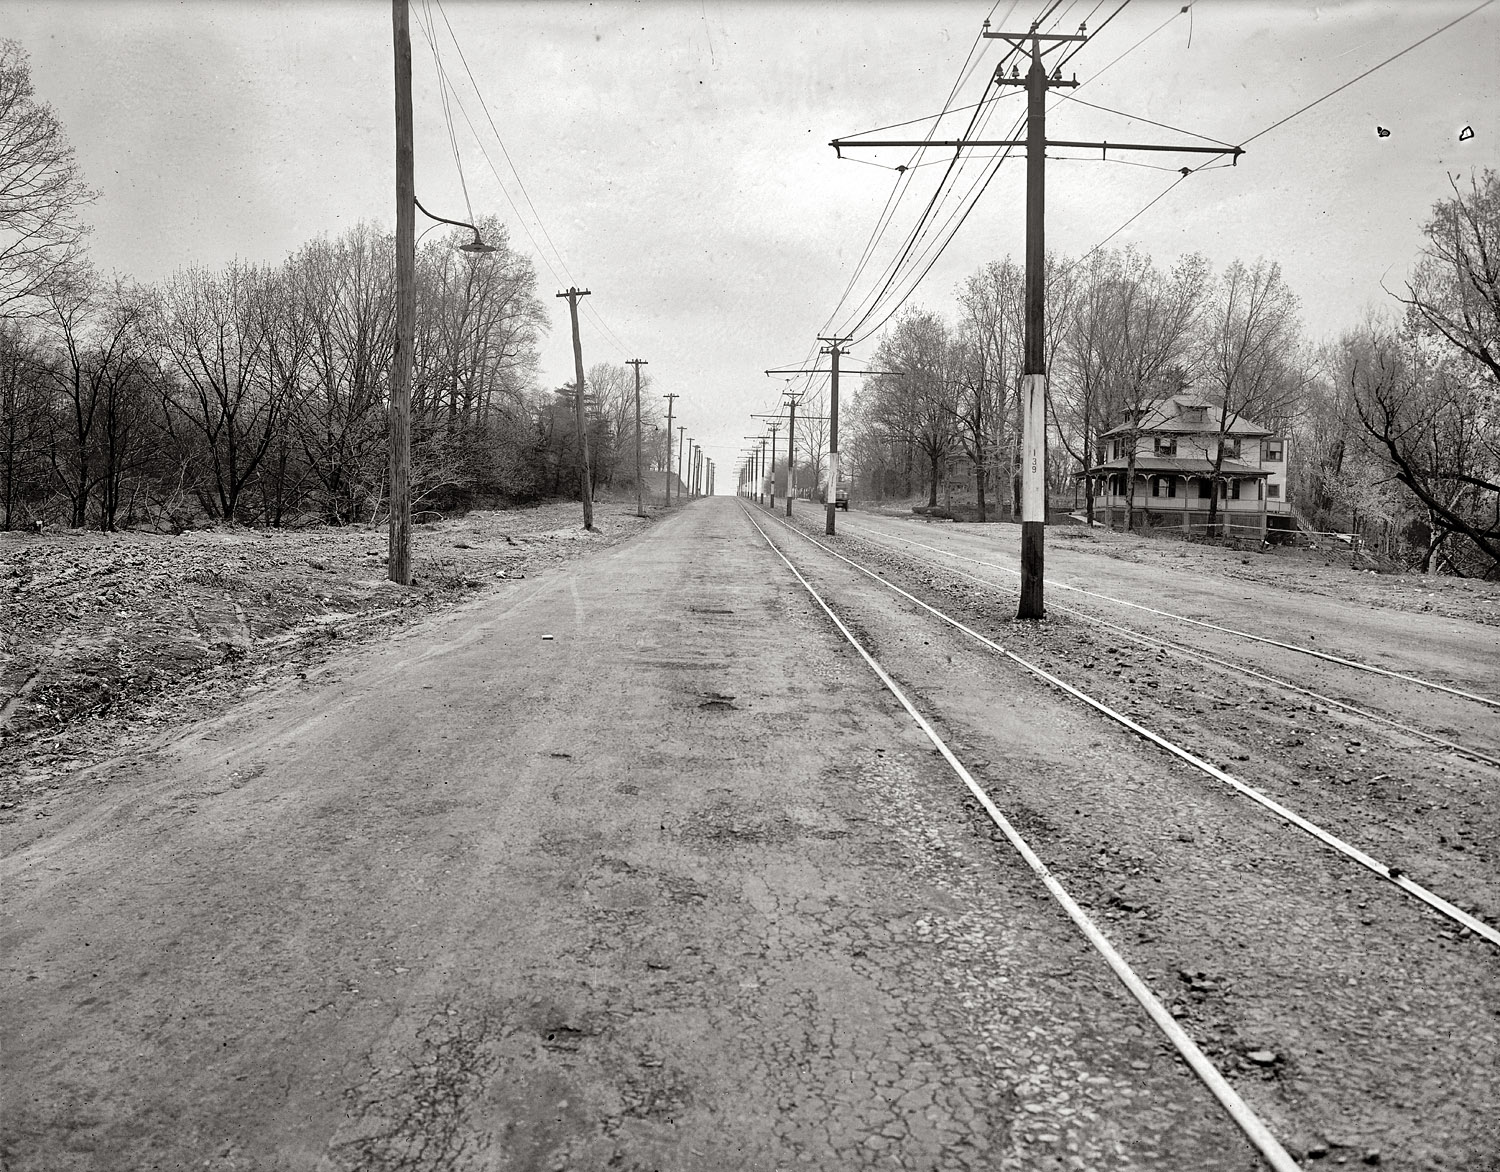 Washington, D.C. "Trolley line on Connecticut Avenue north from Grant Road." 1921 or 1922. View full size. National Photo Company Collection glass negative.